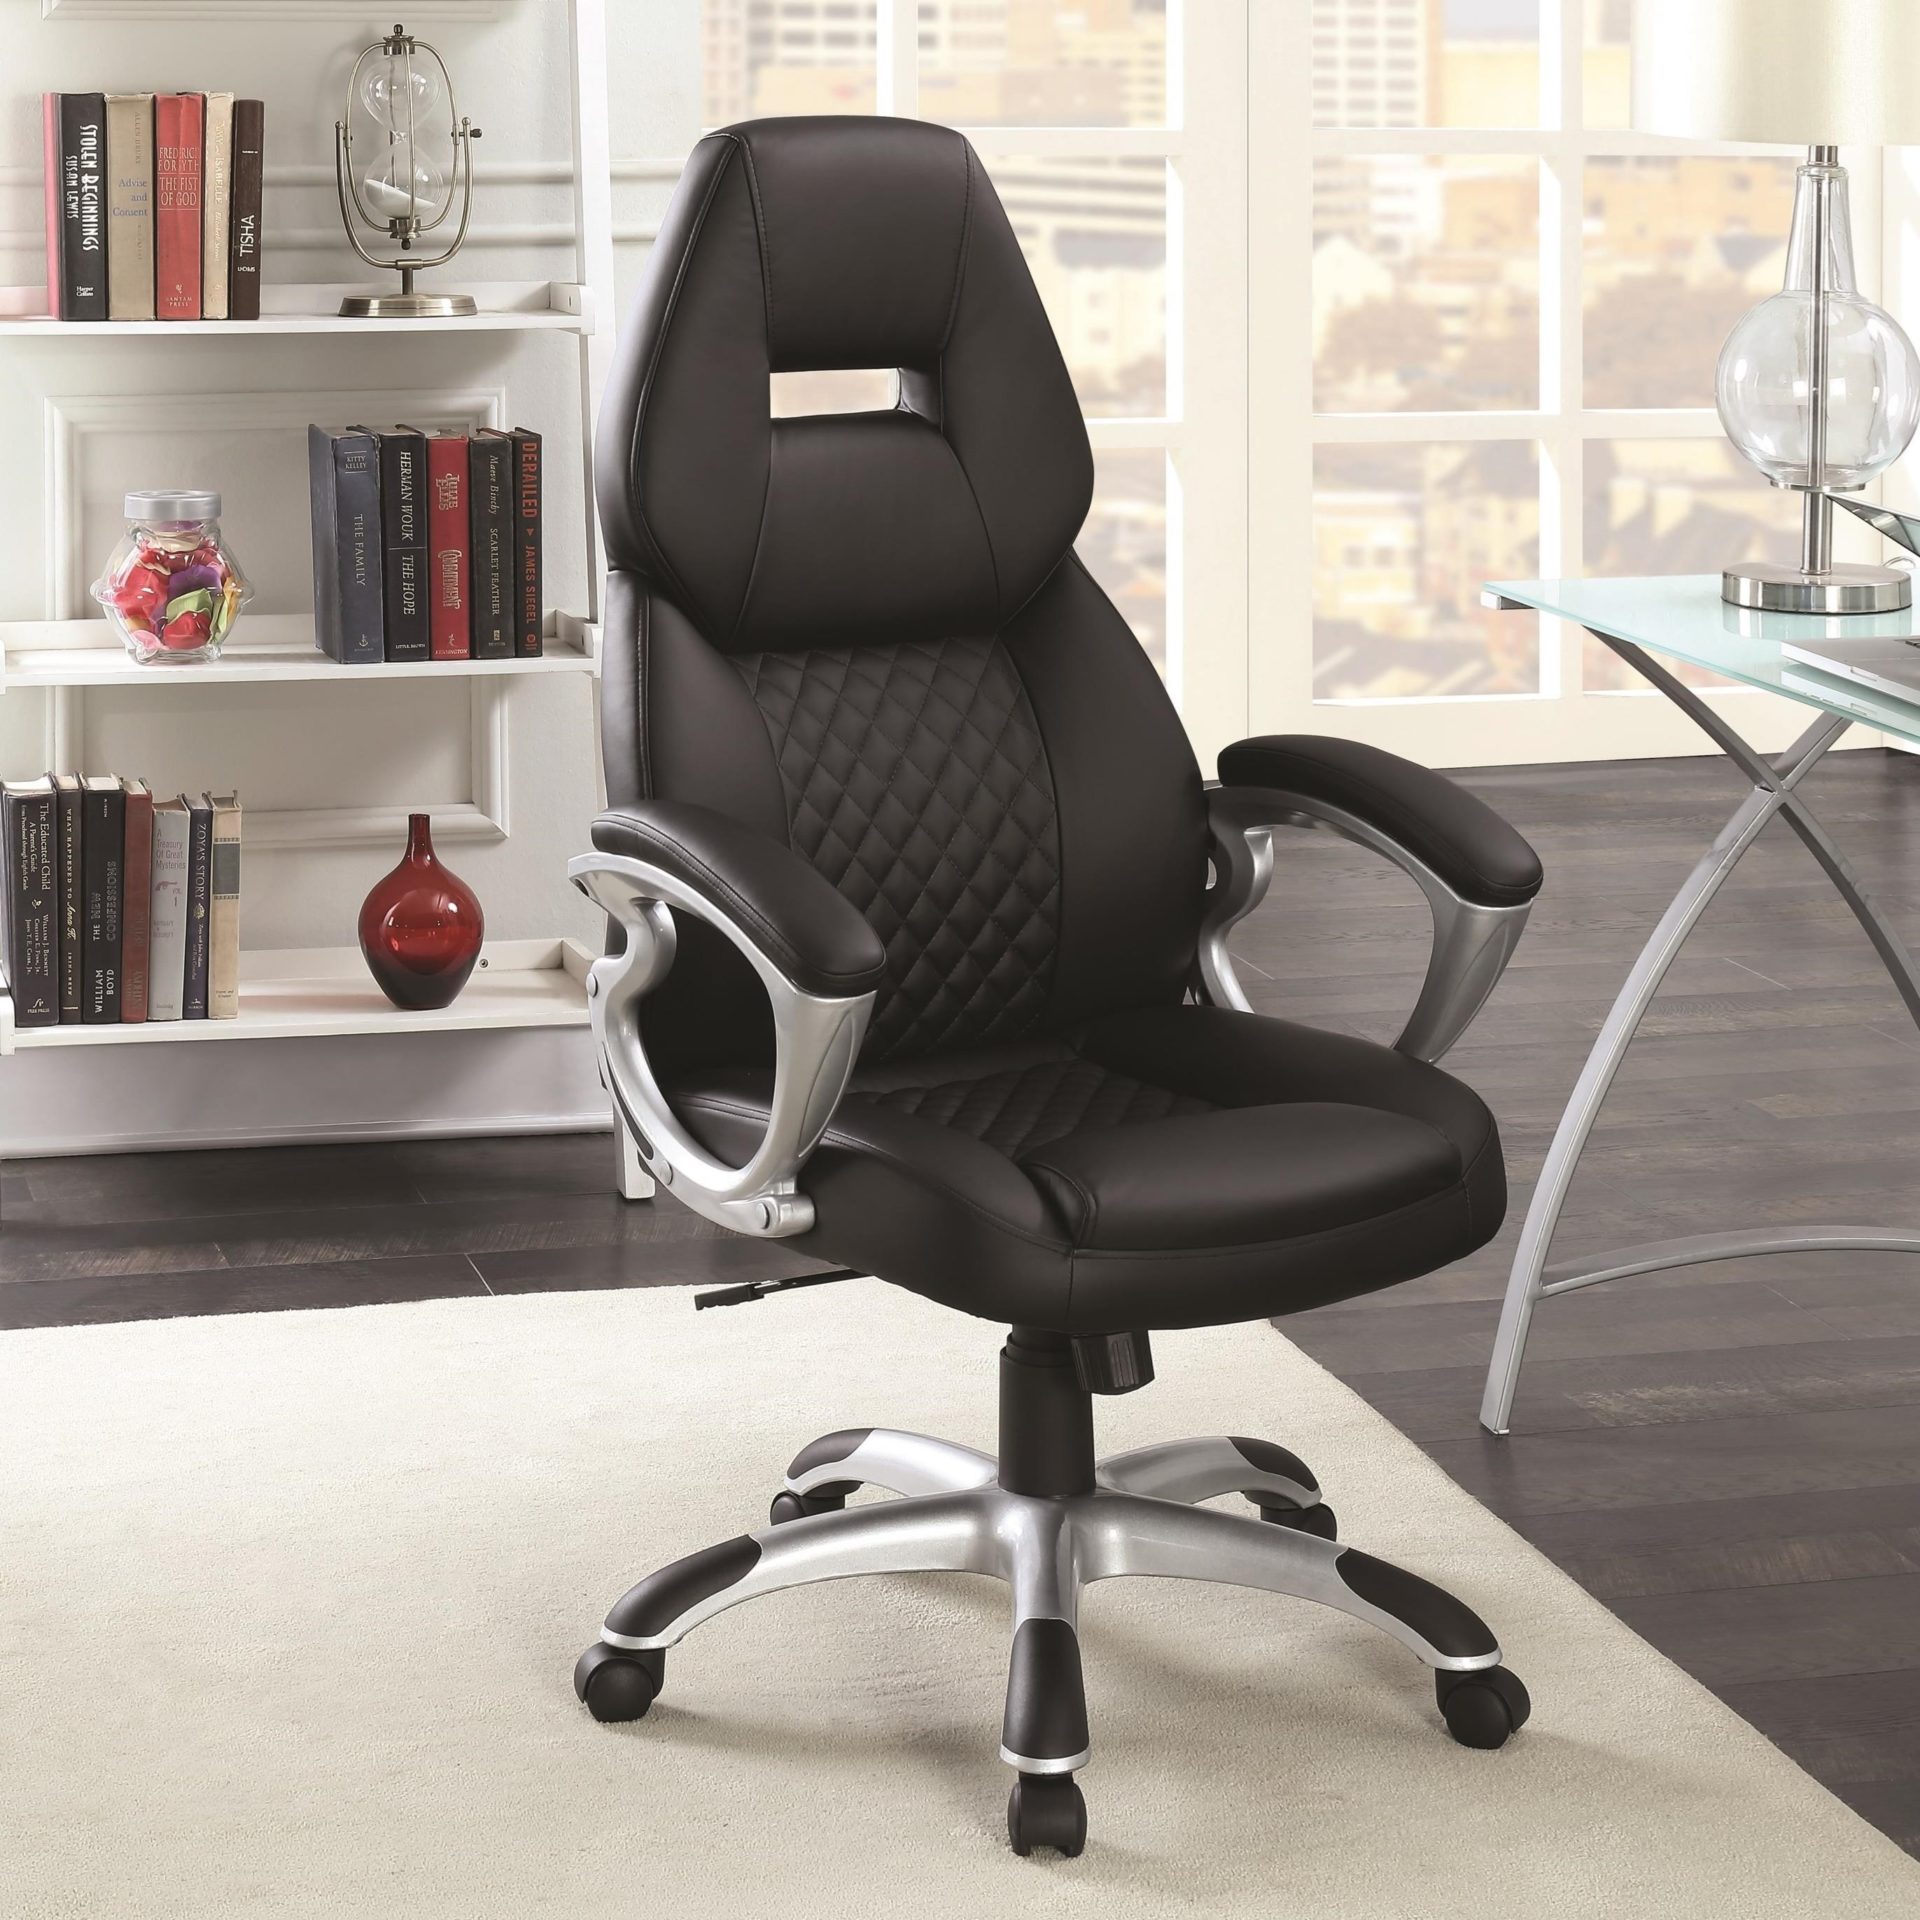 Comfortable work chairs